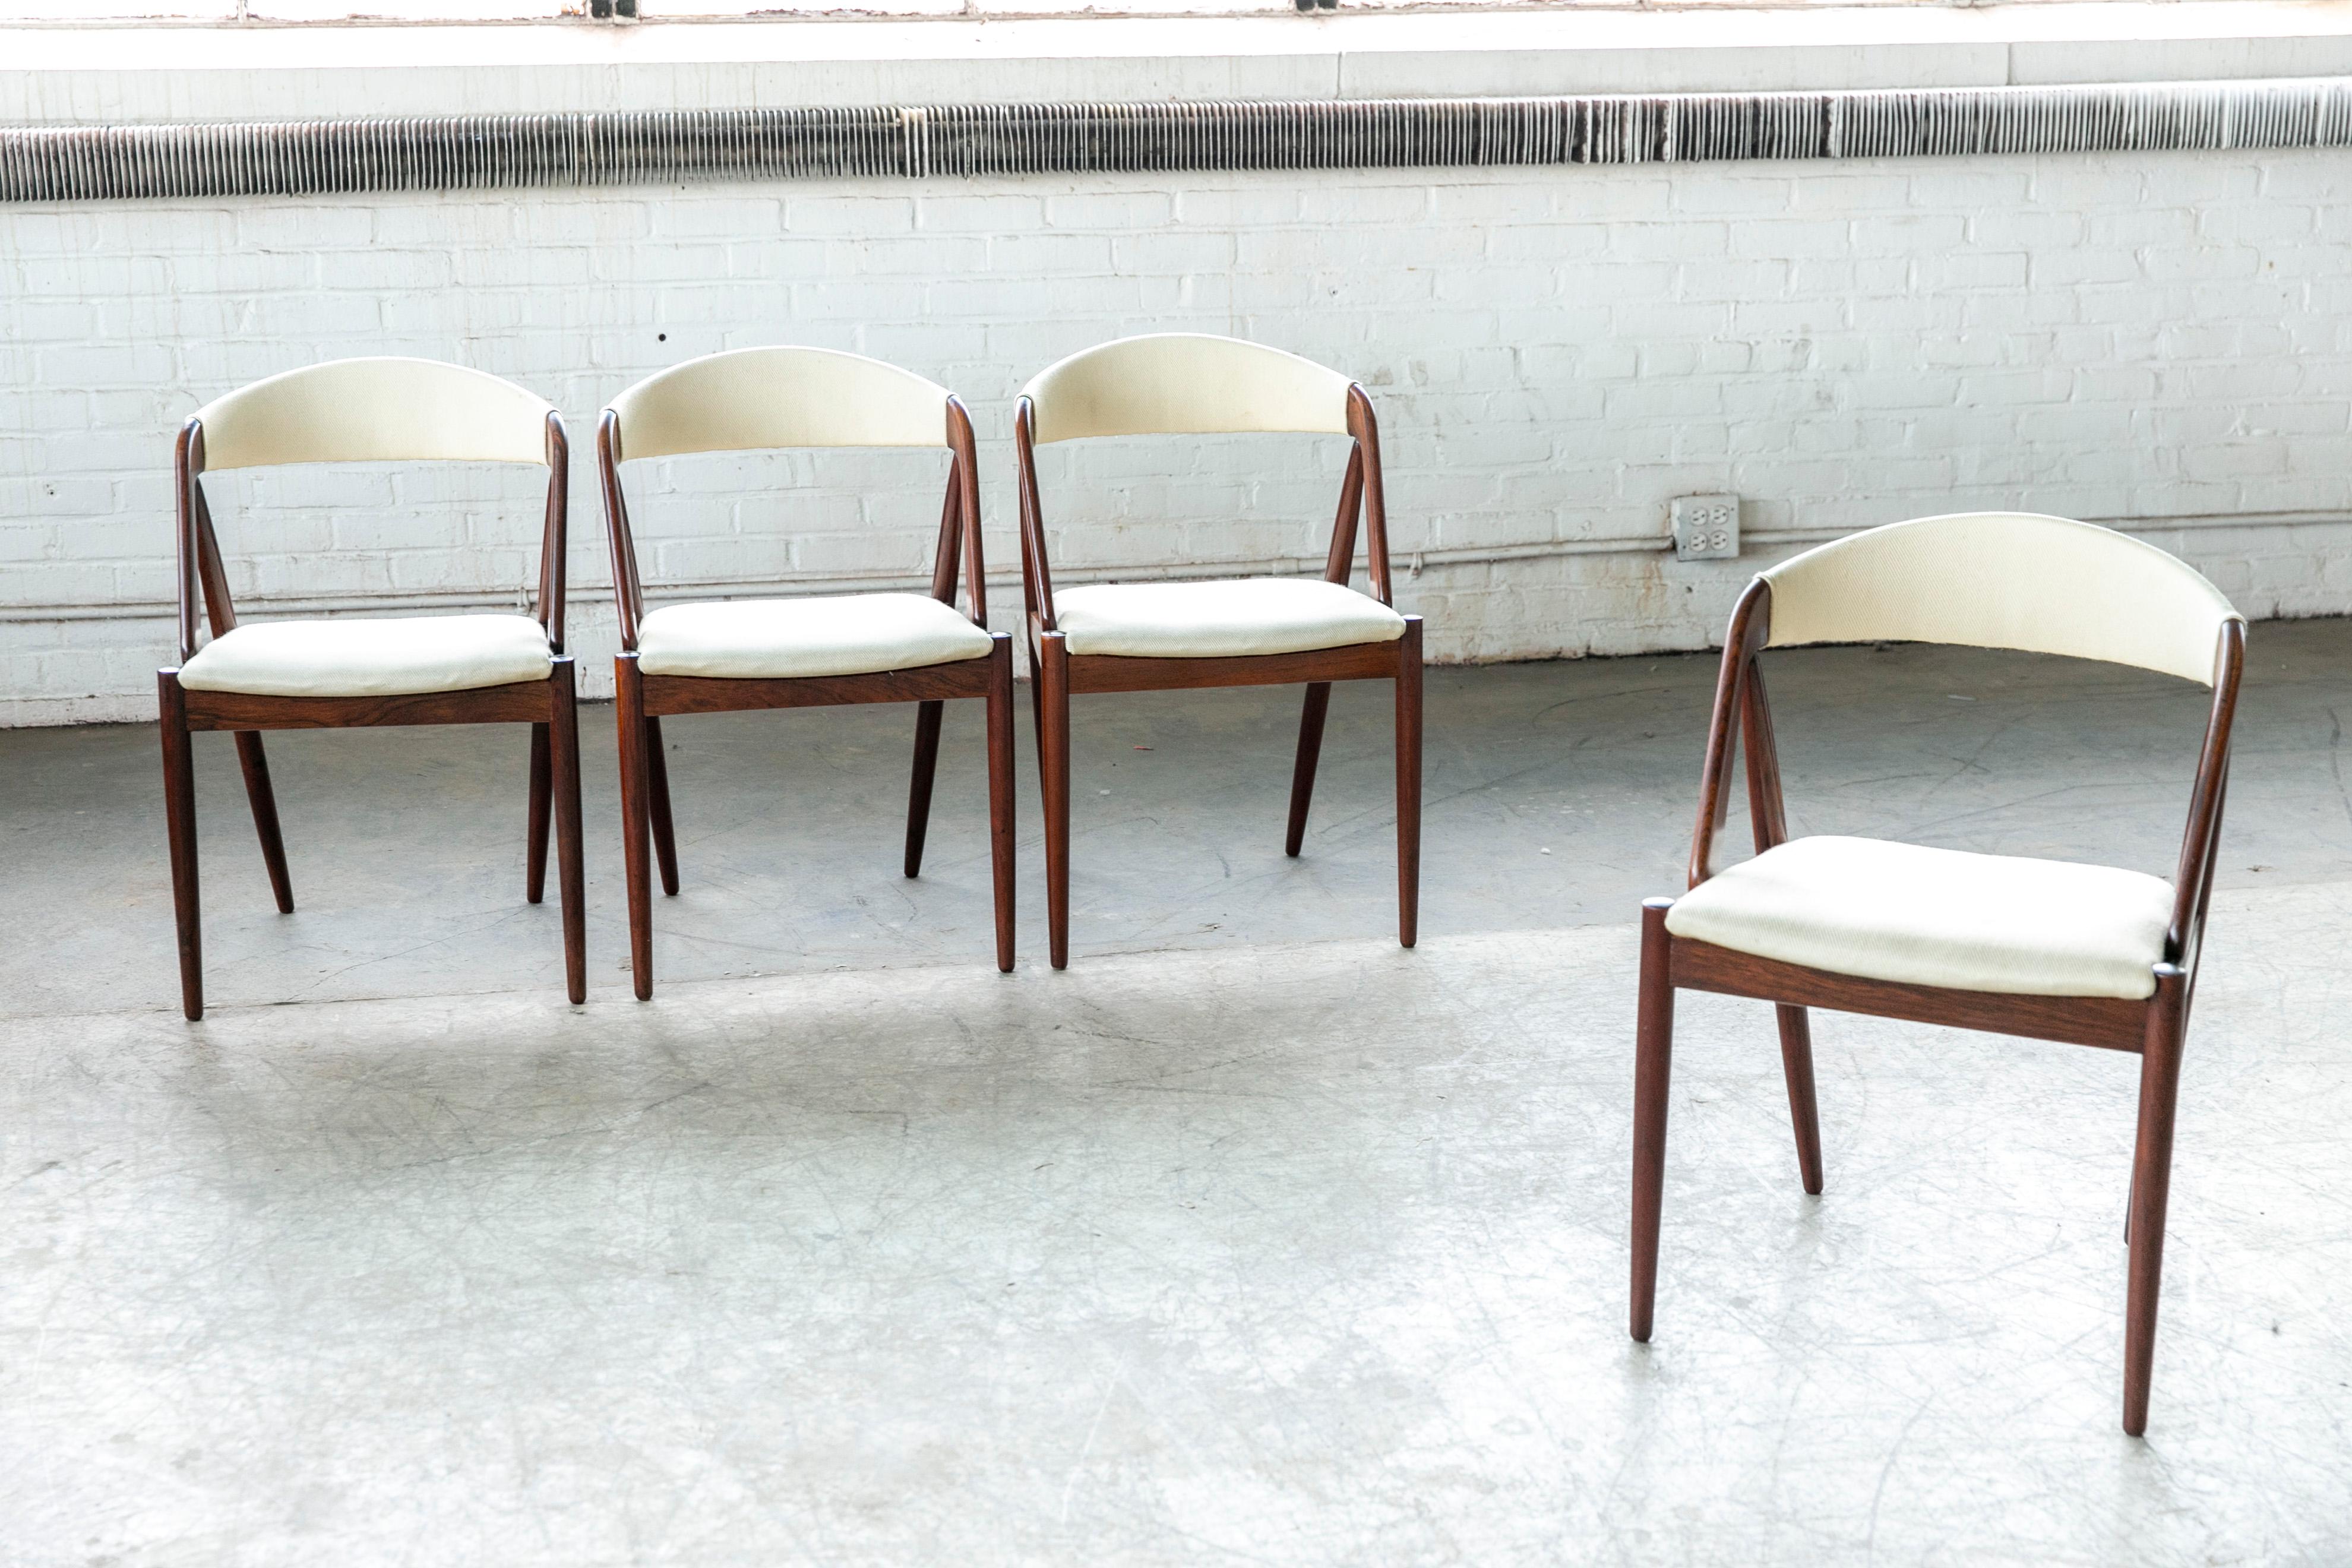 This set of four dining room chairs model 31 in rosewood designed by Kai Kristiansen in 1956 and manufactured by Schou Andersen in the 1960s in Denmark. The chairs are made from rosewood and upholstered in white fabric. Beautiful frames with very